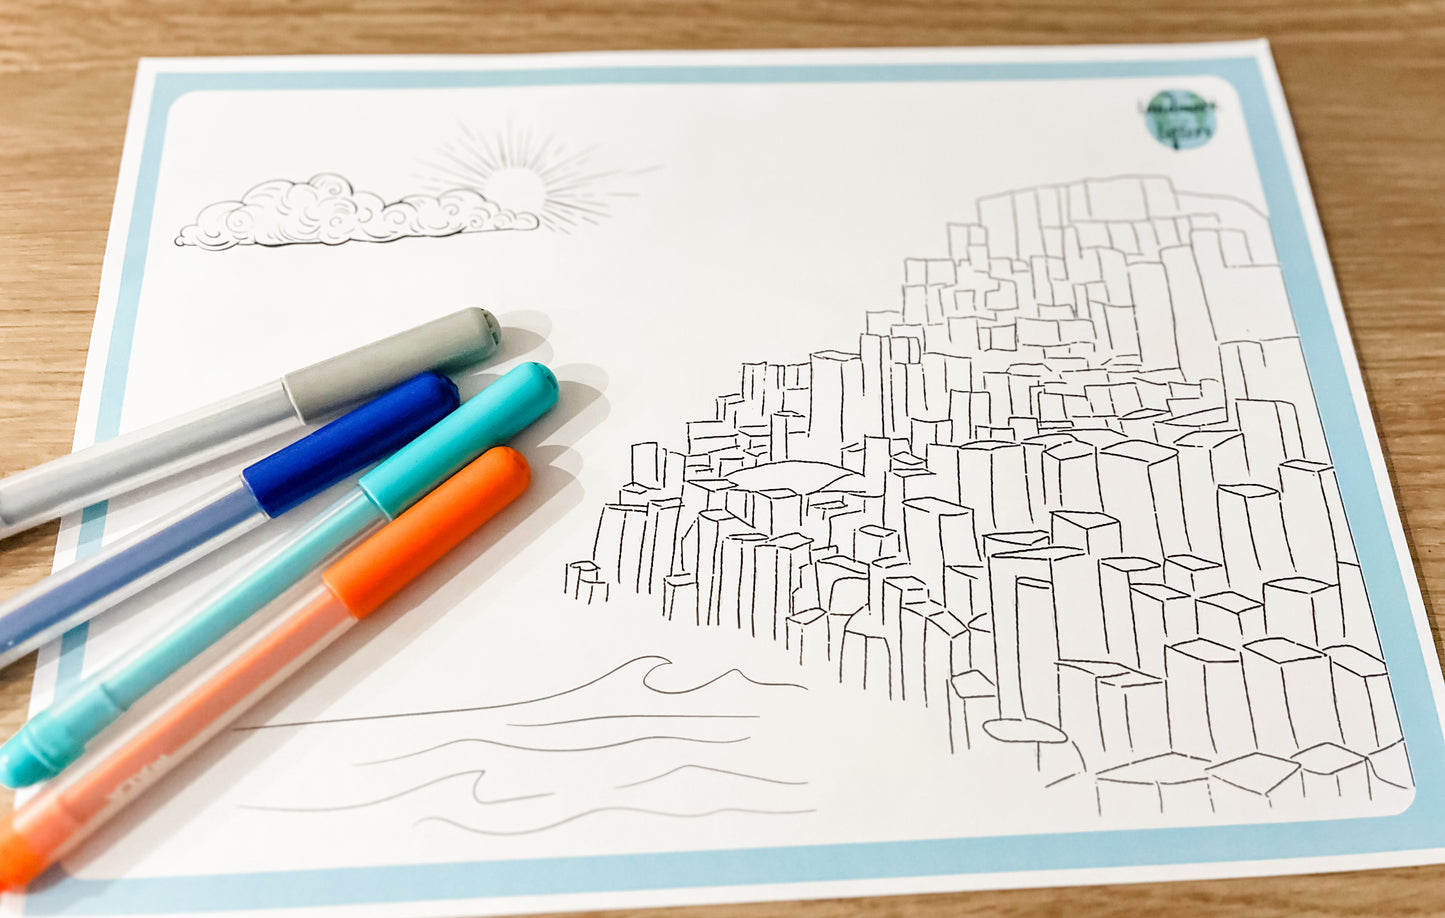 Giant's Causeway Coloring Page